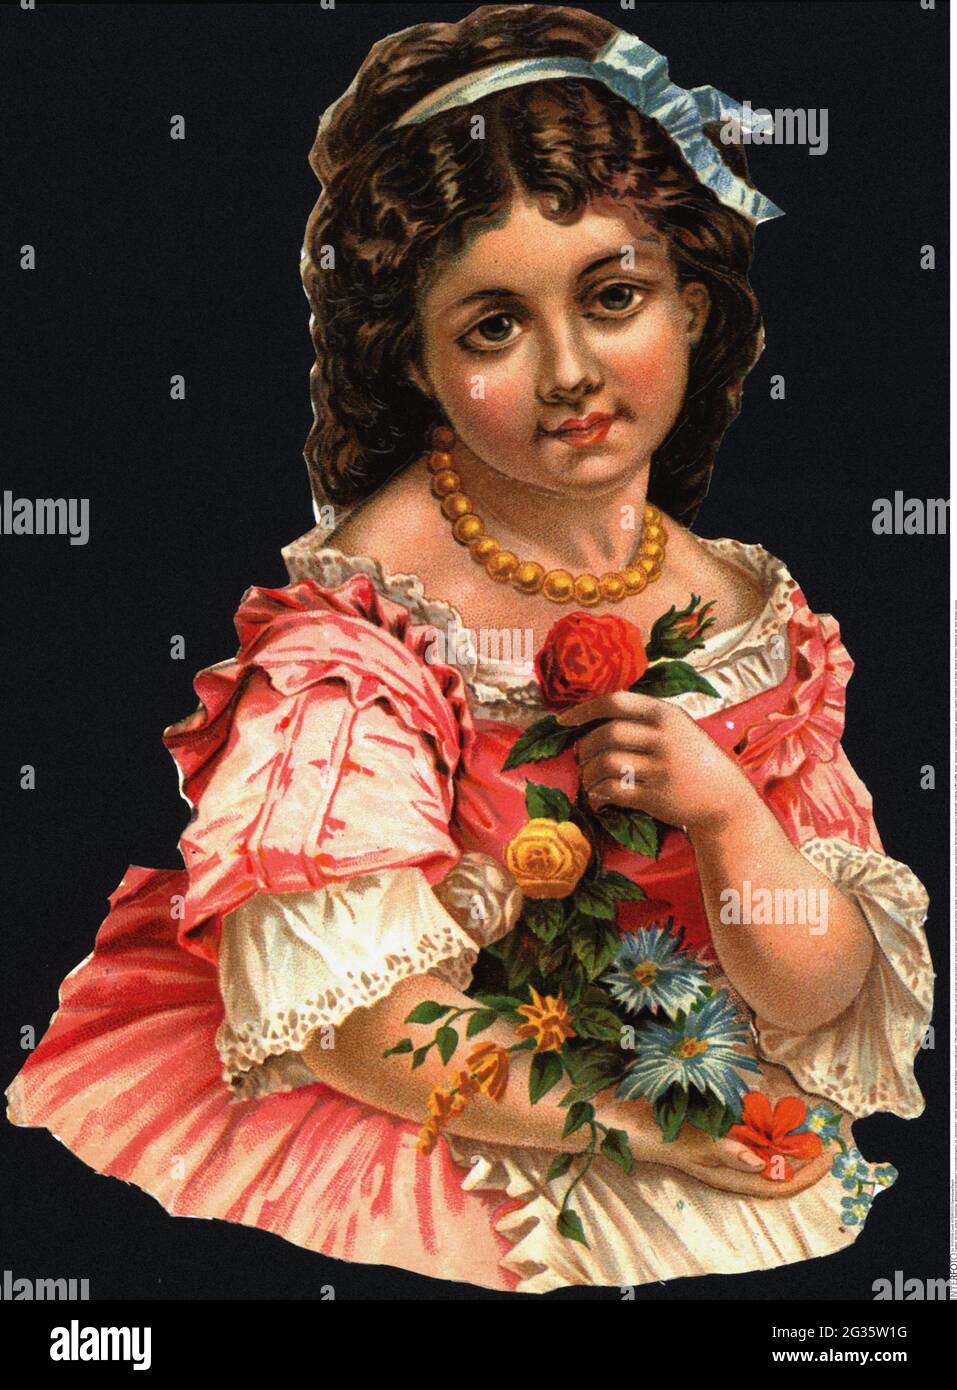 Kitsch, Hochglanzdrucke, Mädchen mit Blumen, Chromolithographie, 20. Jahrhundert, Clipping, cut out, cut-out, ADDITIONAL-RIGHTS-CLEARANCE-INFO-NOT-AVAILABLE Stockfoto